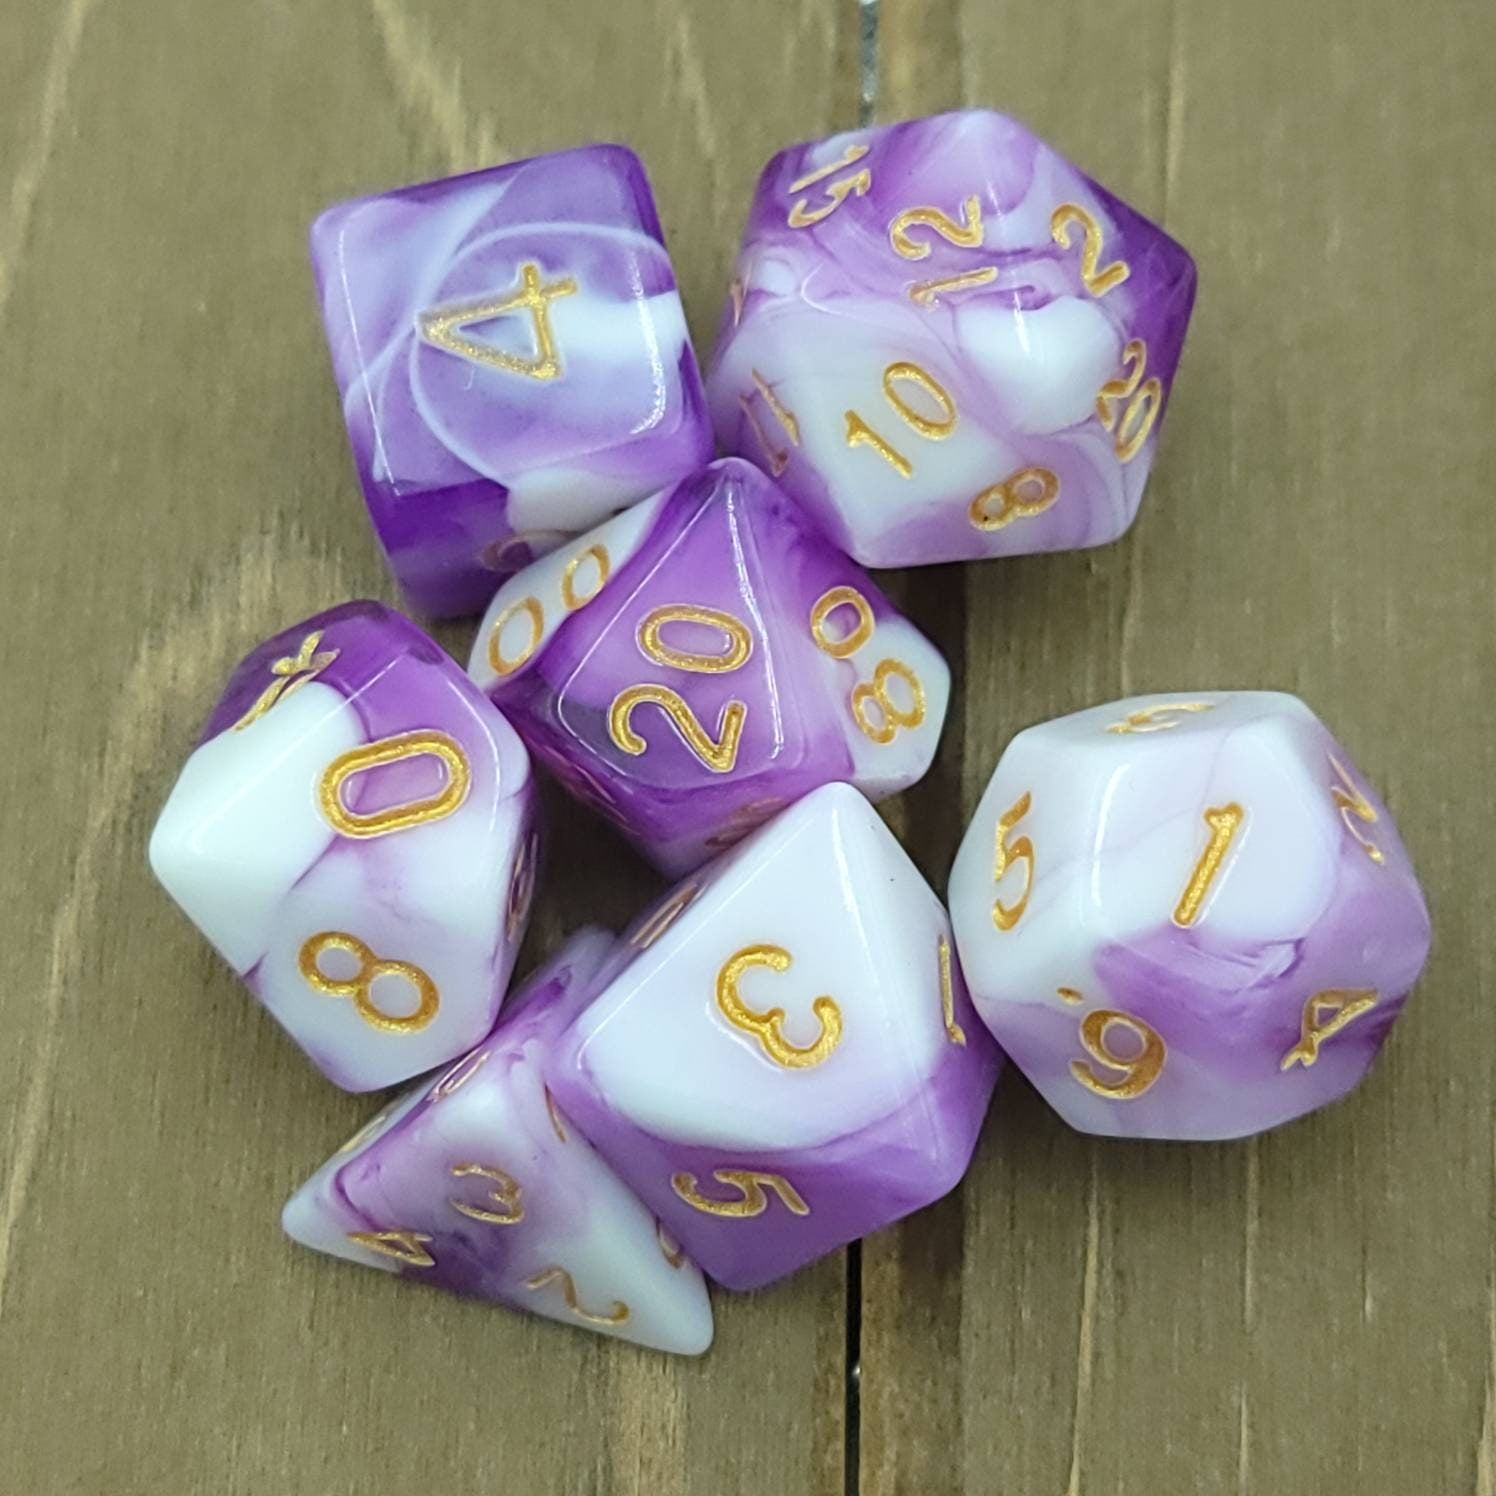 Witches Treat | RPG Dice Set| RPG Dice | Polyhedral Dice Set | Dungeons and Dragons | DnD Dice Set | Gaming Dice Set